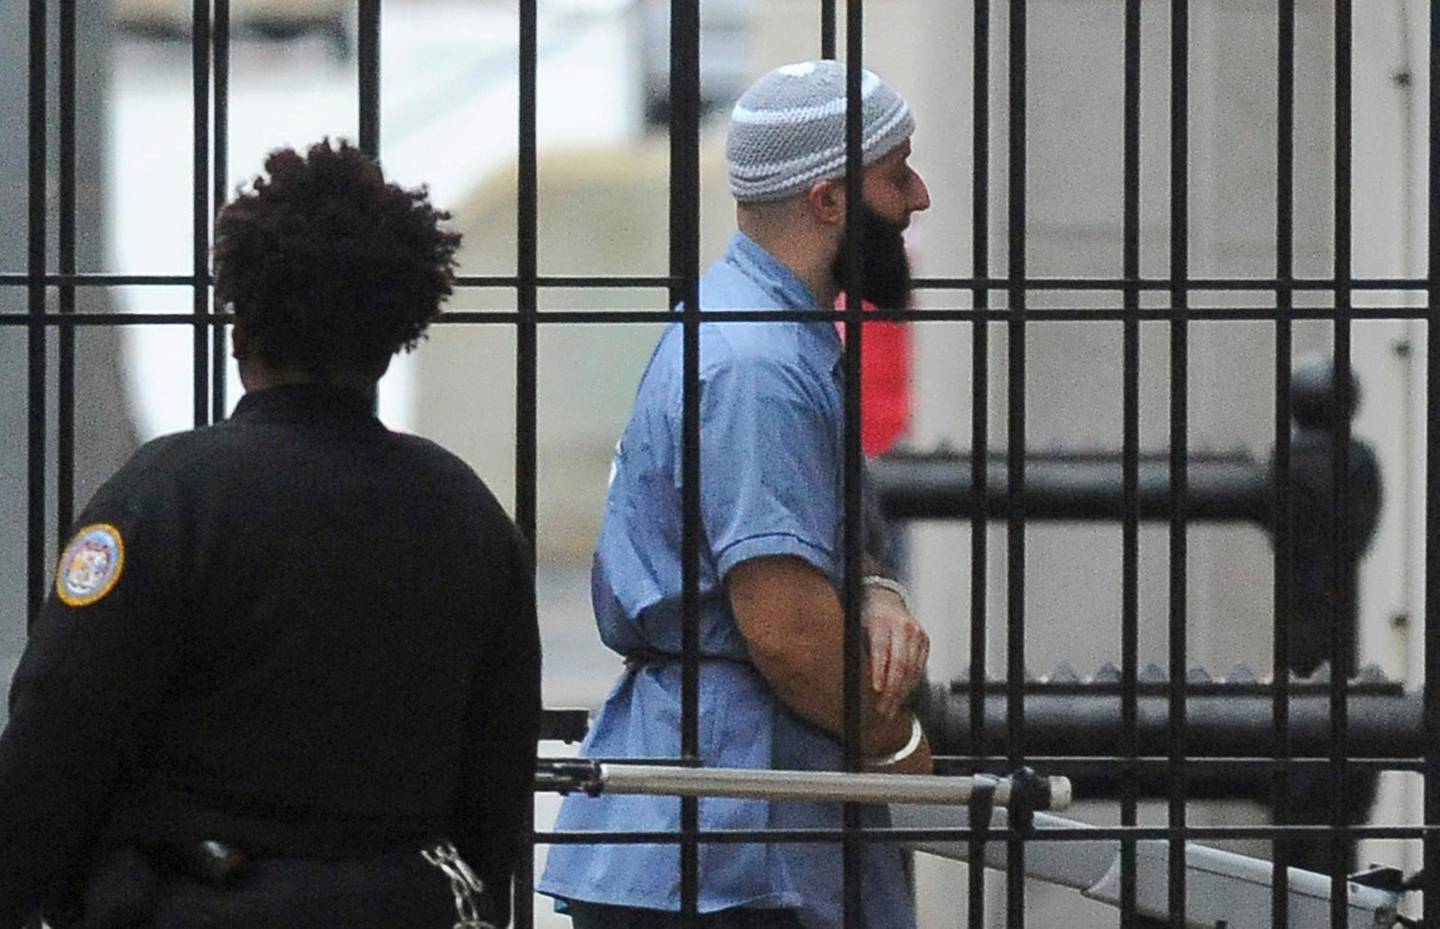 FILE - In this Feb. 3, 2016 file photo, Adnan Syed enters Courthouse East in Baltimore prior to a hearing.    A Maryland appeals court has upheld a ruling, Thursday, March 29, 2018,  granting a new trial to Syed, whose conviction in the murder of his high school sweetheart became the subject of the popular podcast "Serial." Syed was convicted in 2000 of killing Hae Min Lee and burying her body in a shallow grave in a Baltimore park. A three-judge panel on Thursday upheld a lower court ruling granting him new trial.(Barbara Haddock Taylor/The Baltimore Sun via AP)